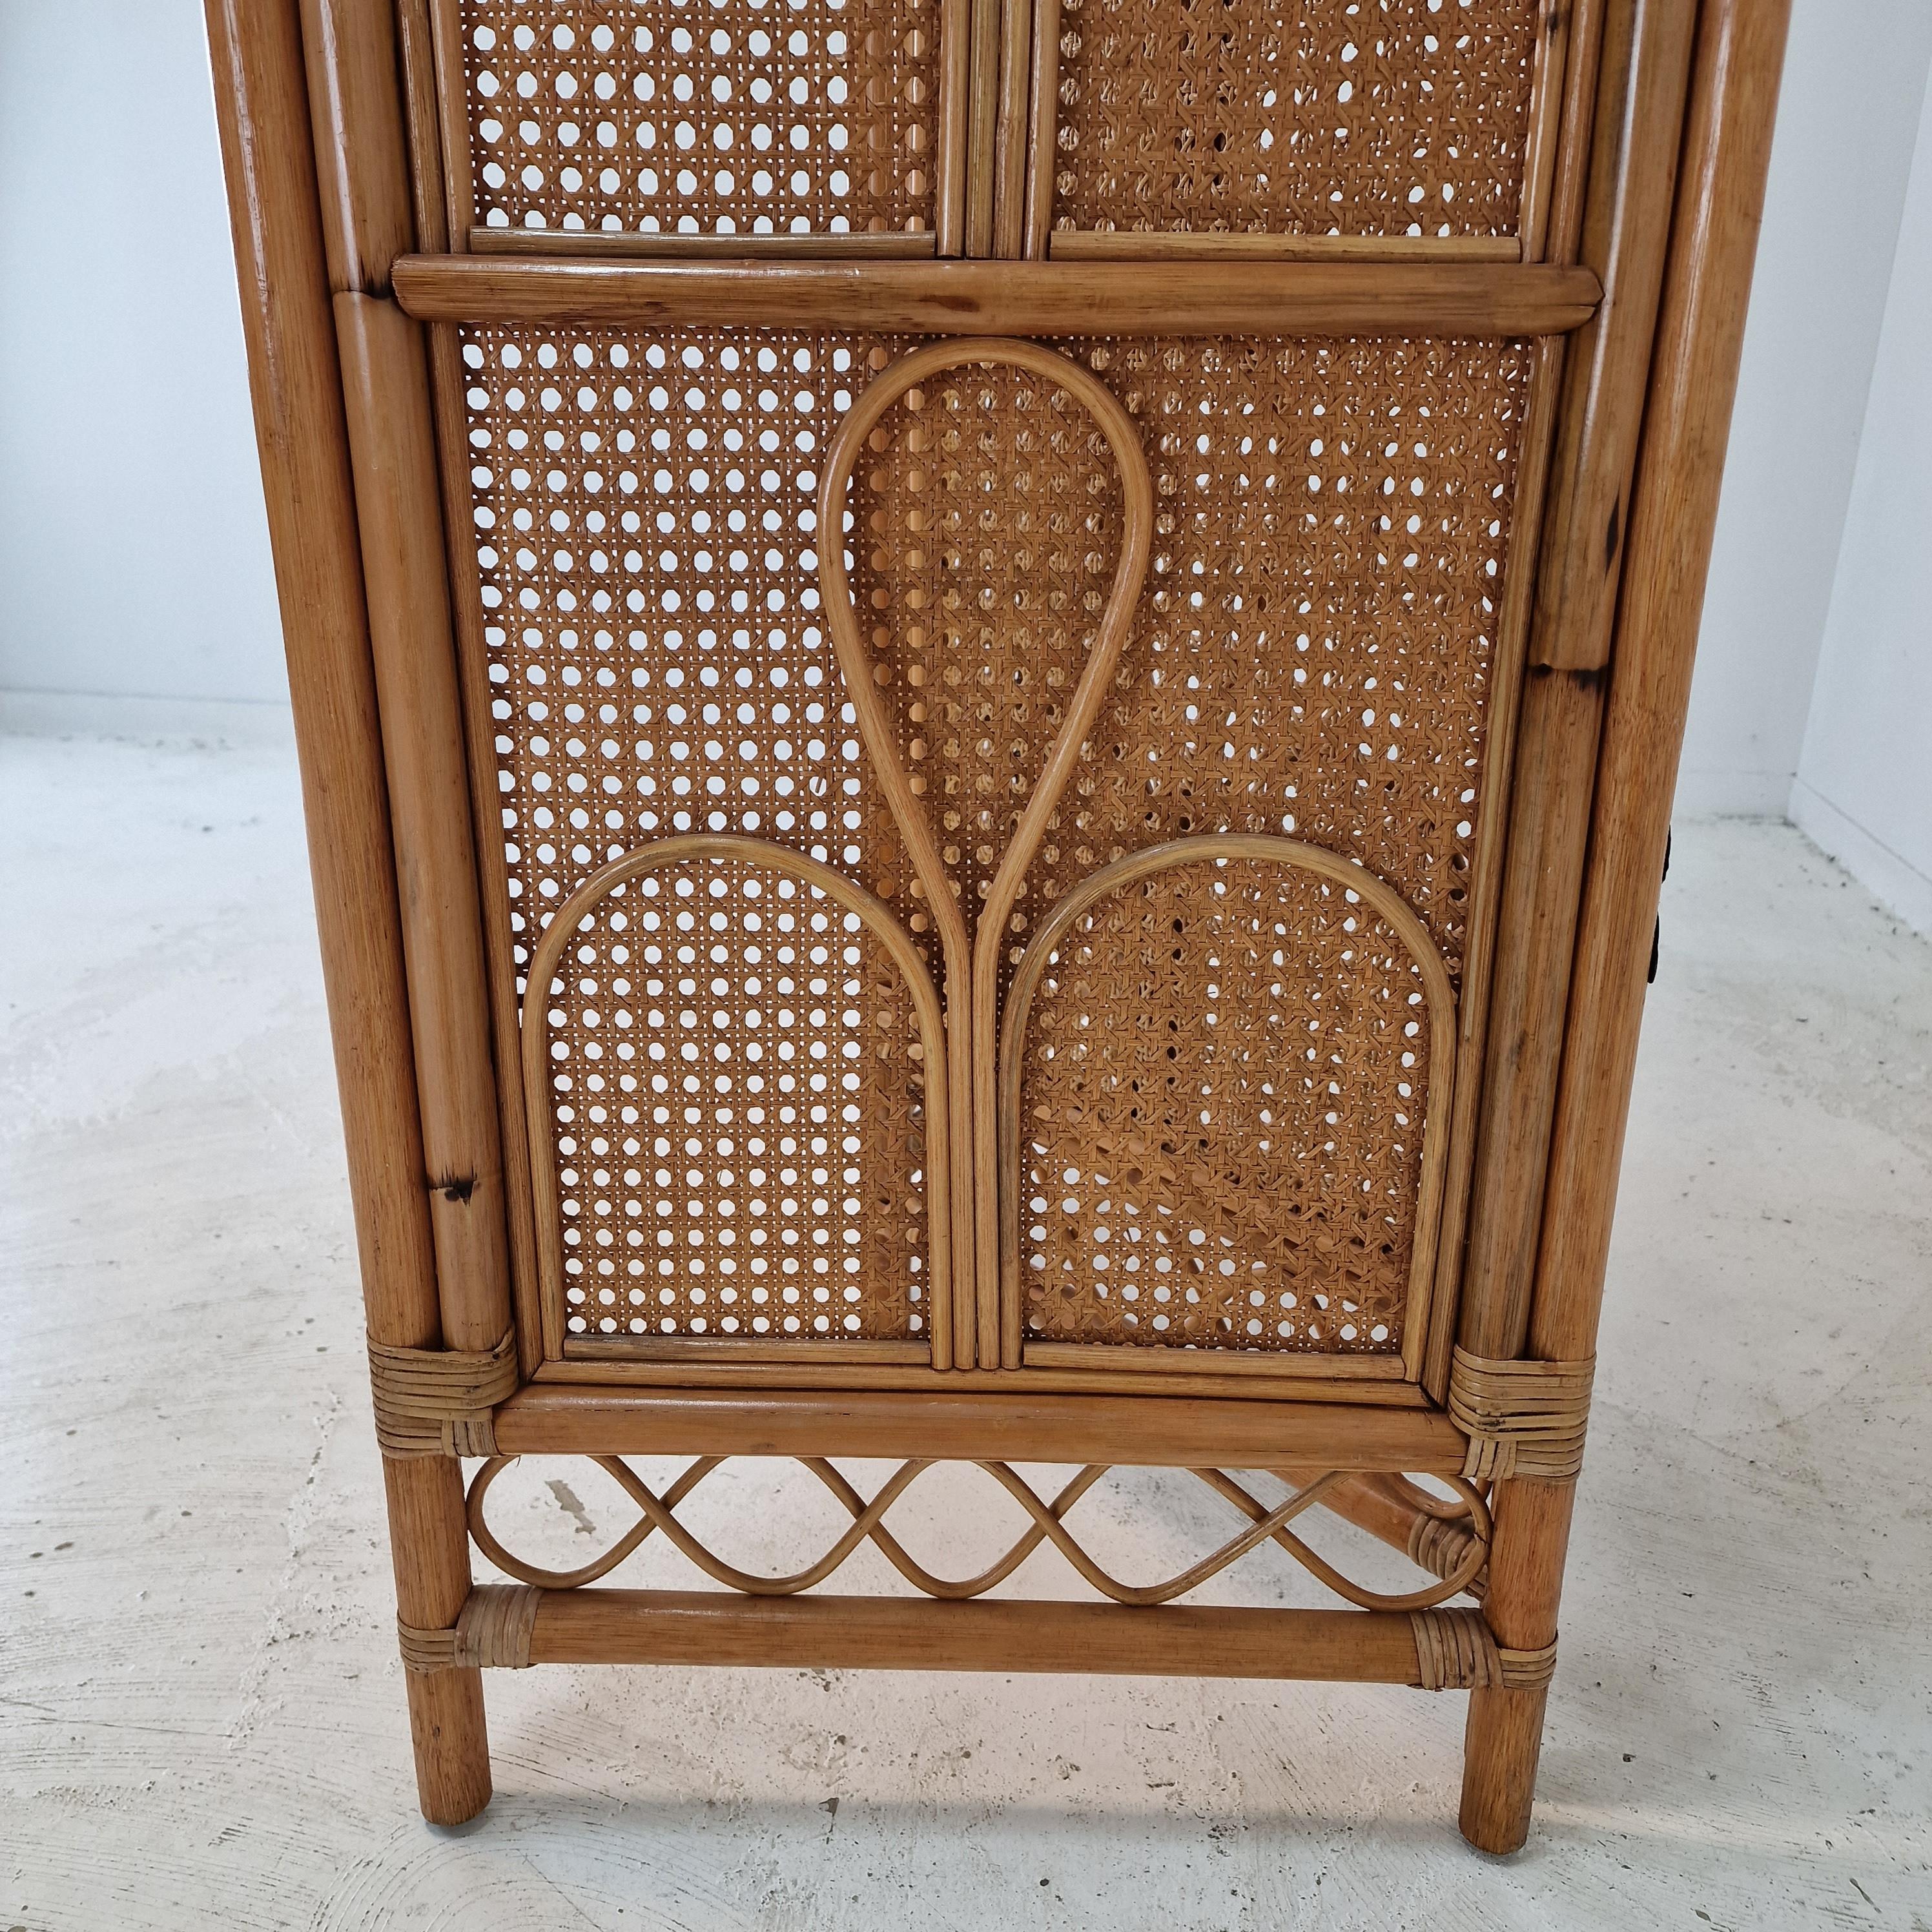 Italian Room Divider in Rattan and Wicker, 1960s For Sale 2